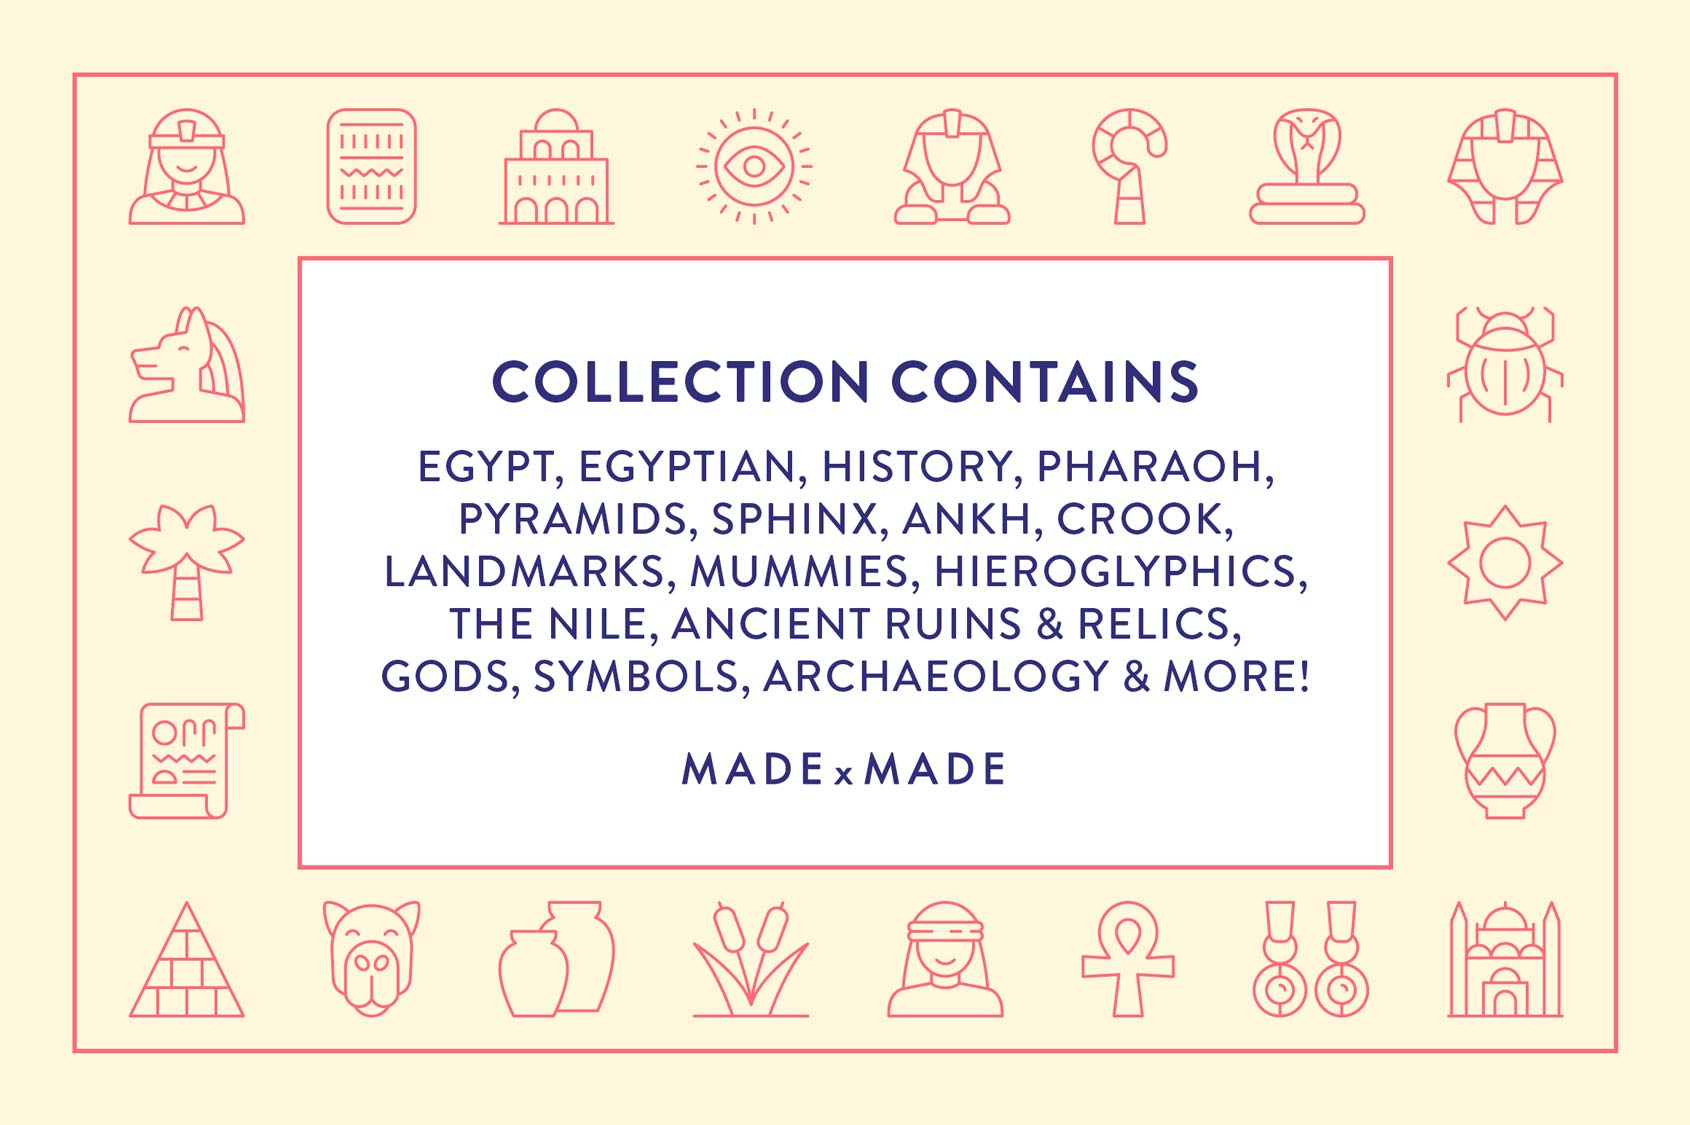 made x made icons Egypt cover – icons for ancient Egypt, history, pyramids, pharaohs, mummification, gods, archaeology - collection contains